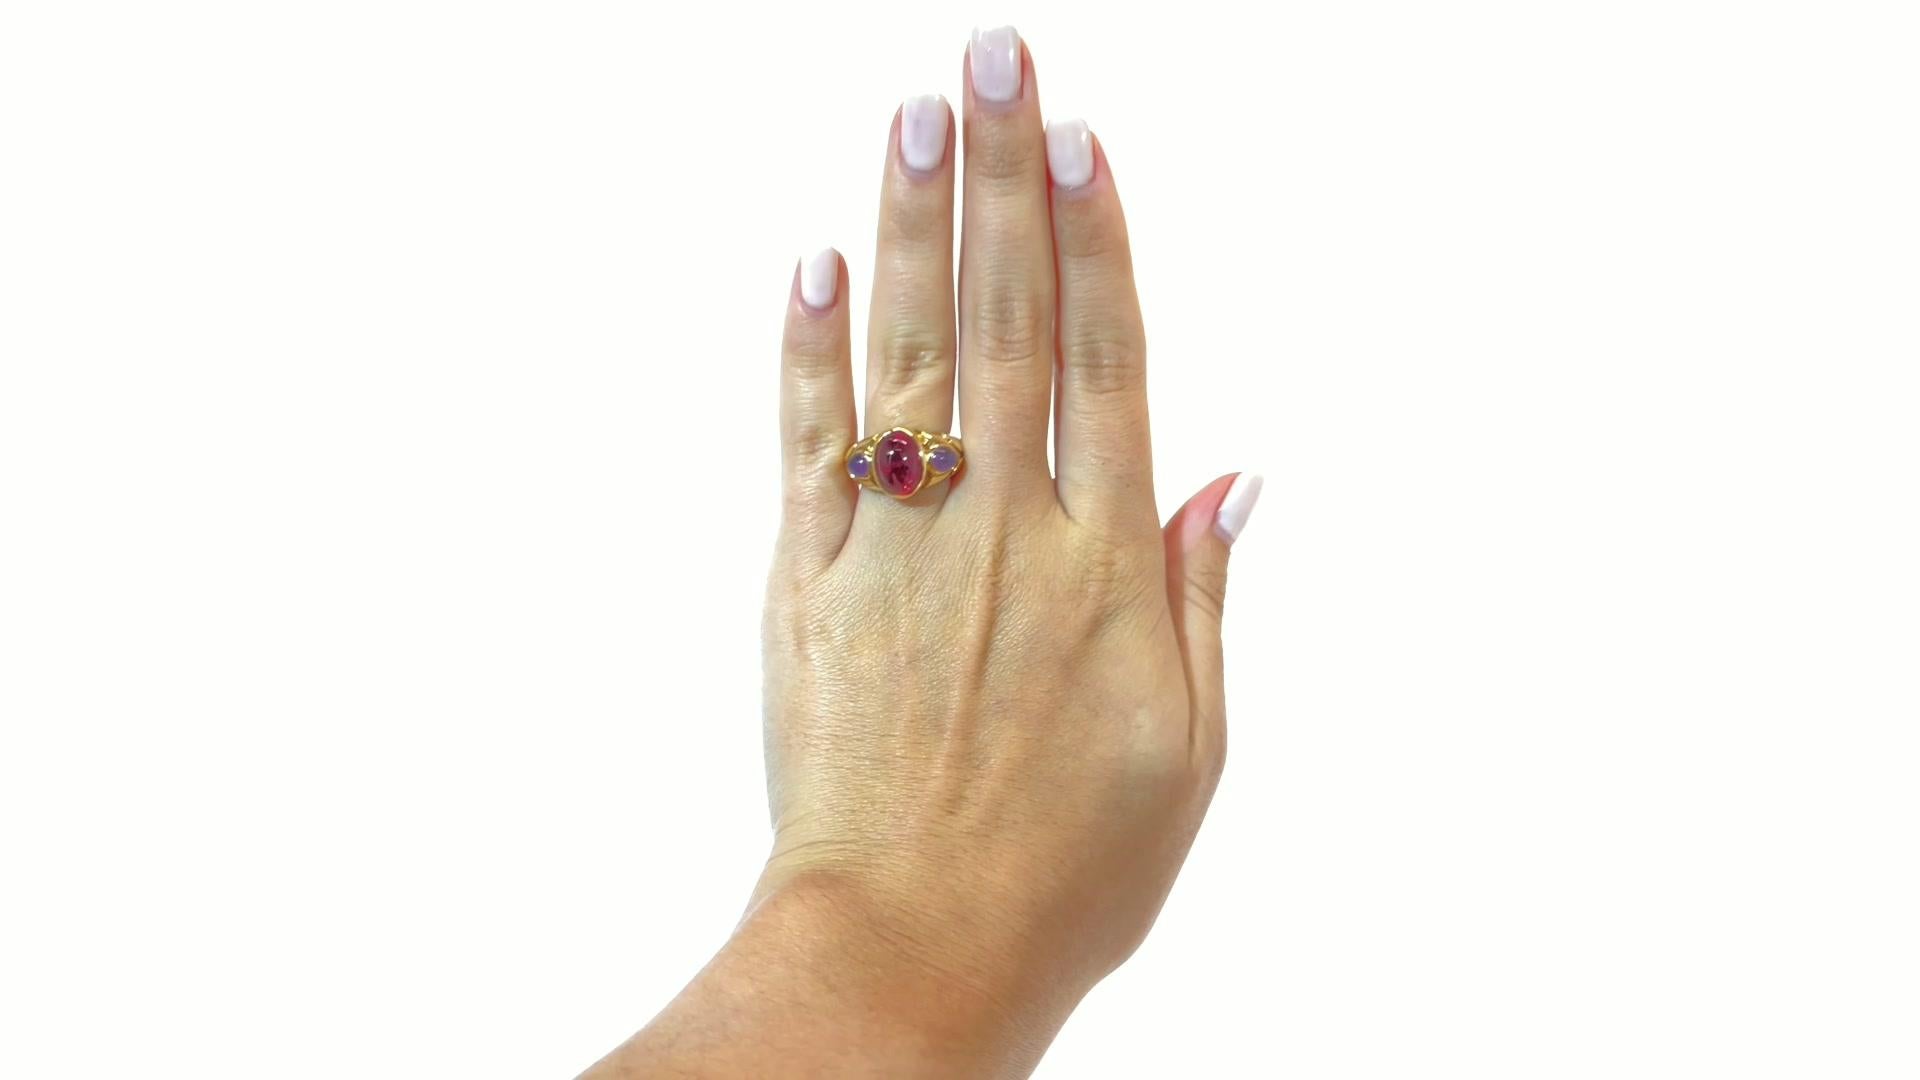 Vintage Bvlgari Ruby Amethyst Gold Ring. Featuring cabochon cut ruby approximately 5.80 carat, two cabochon cut amethysts approximately 0.70 carat total. Signed Bvlgari with Italian hallmarks. Circa 1990s. Size 5 1/4 and may be resized.

About The